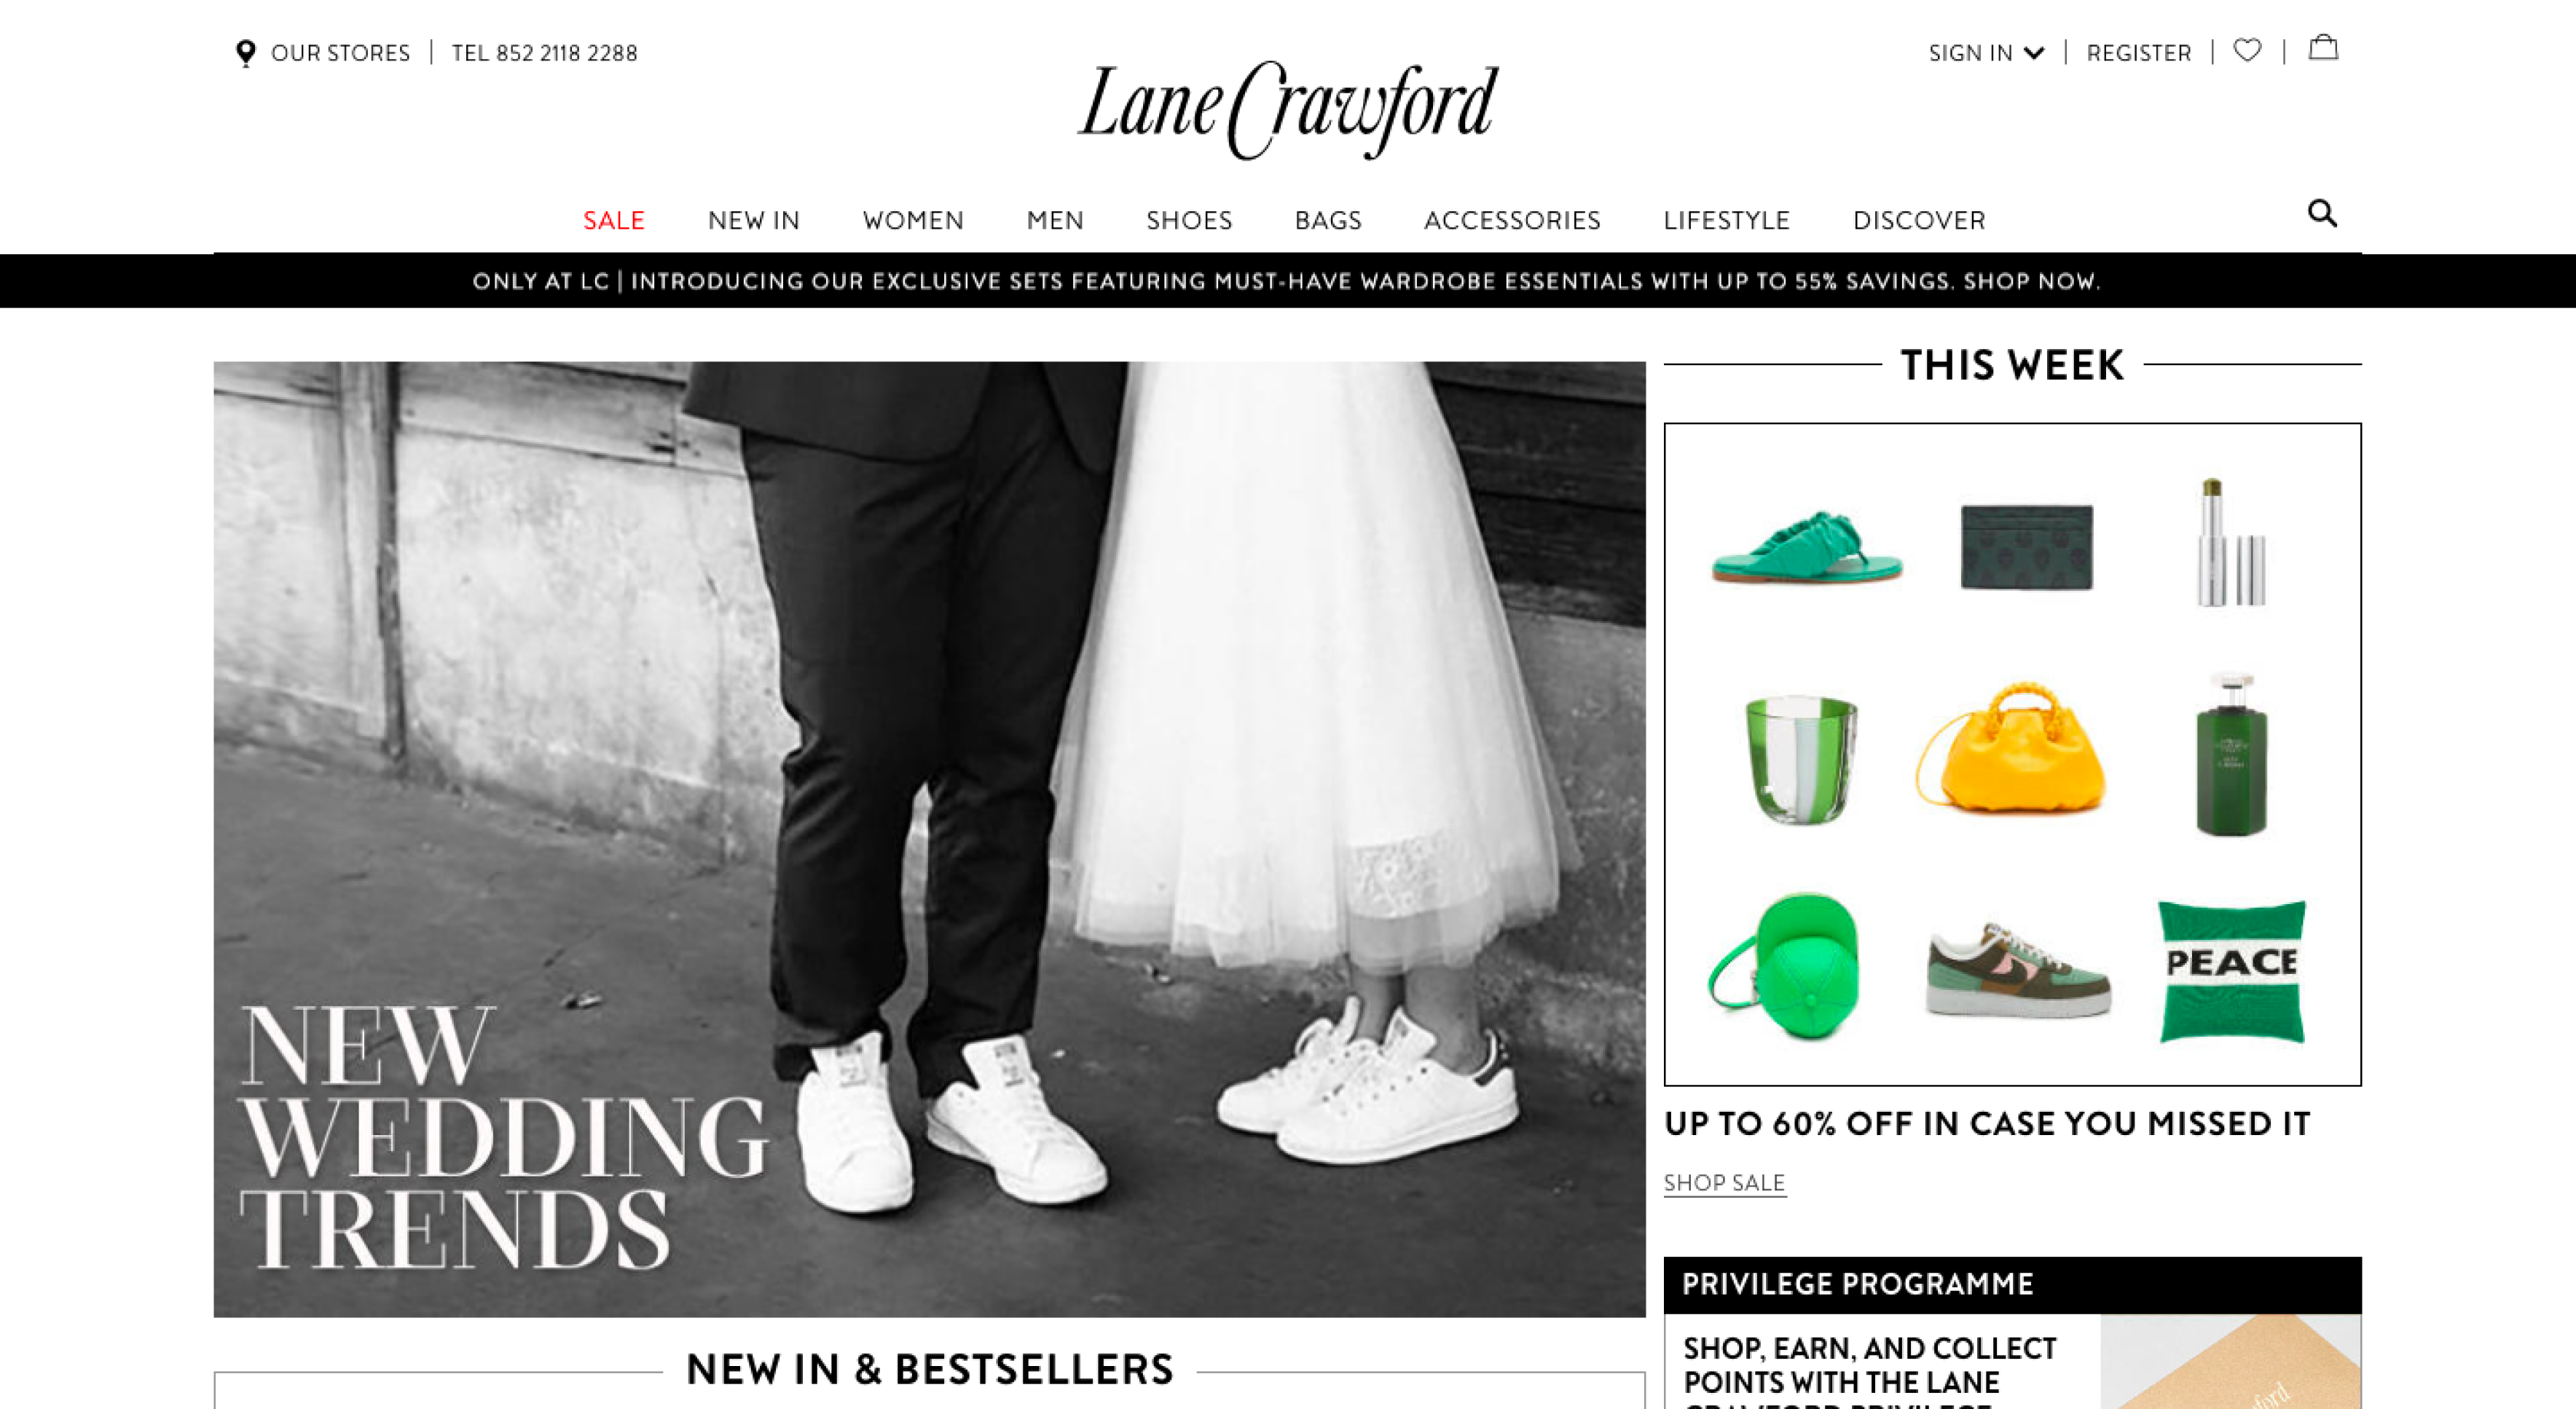 The luxury fashion brand Lane Crawford has its e-Commerce website powered by Oracle Commerce